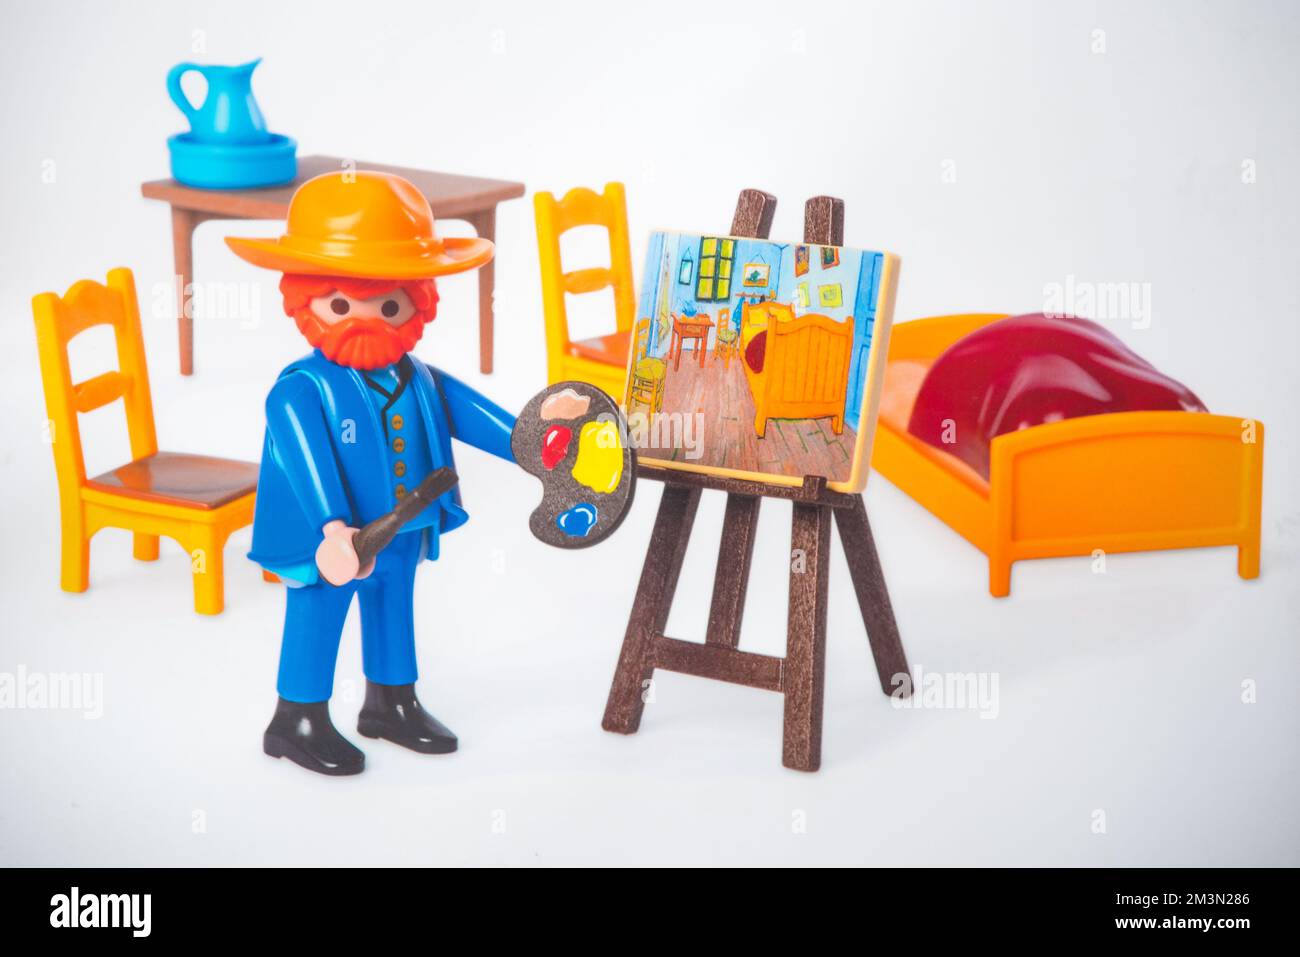 Amsterdam, Netherlands. December 2022. Vincent van Gogh as a play mobil figure. High quality photo Stock Photo